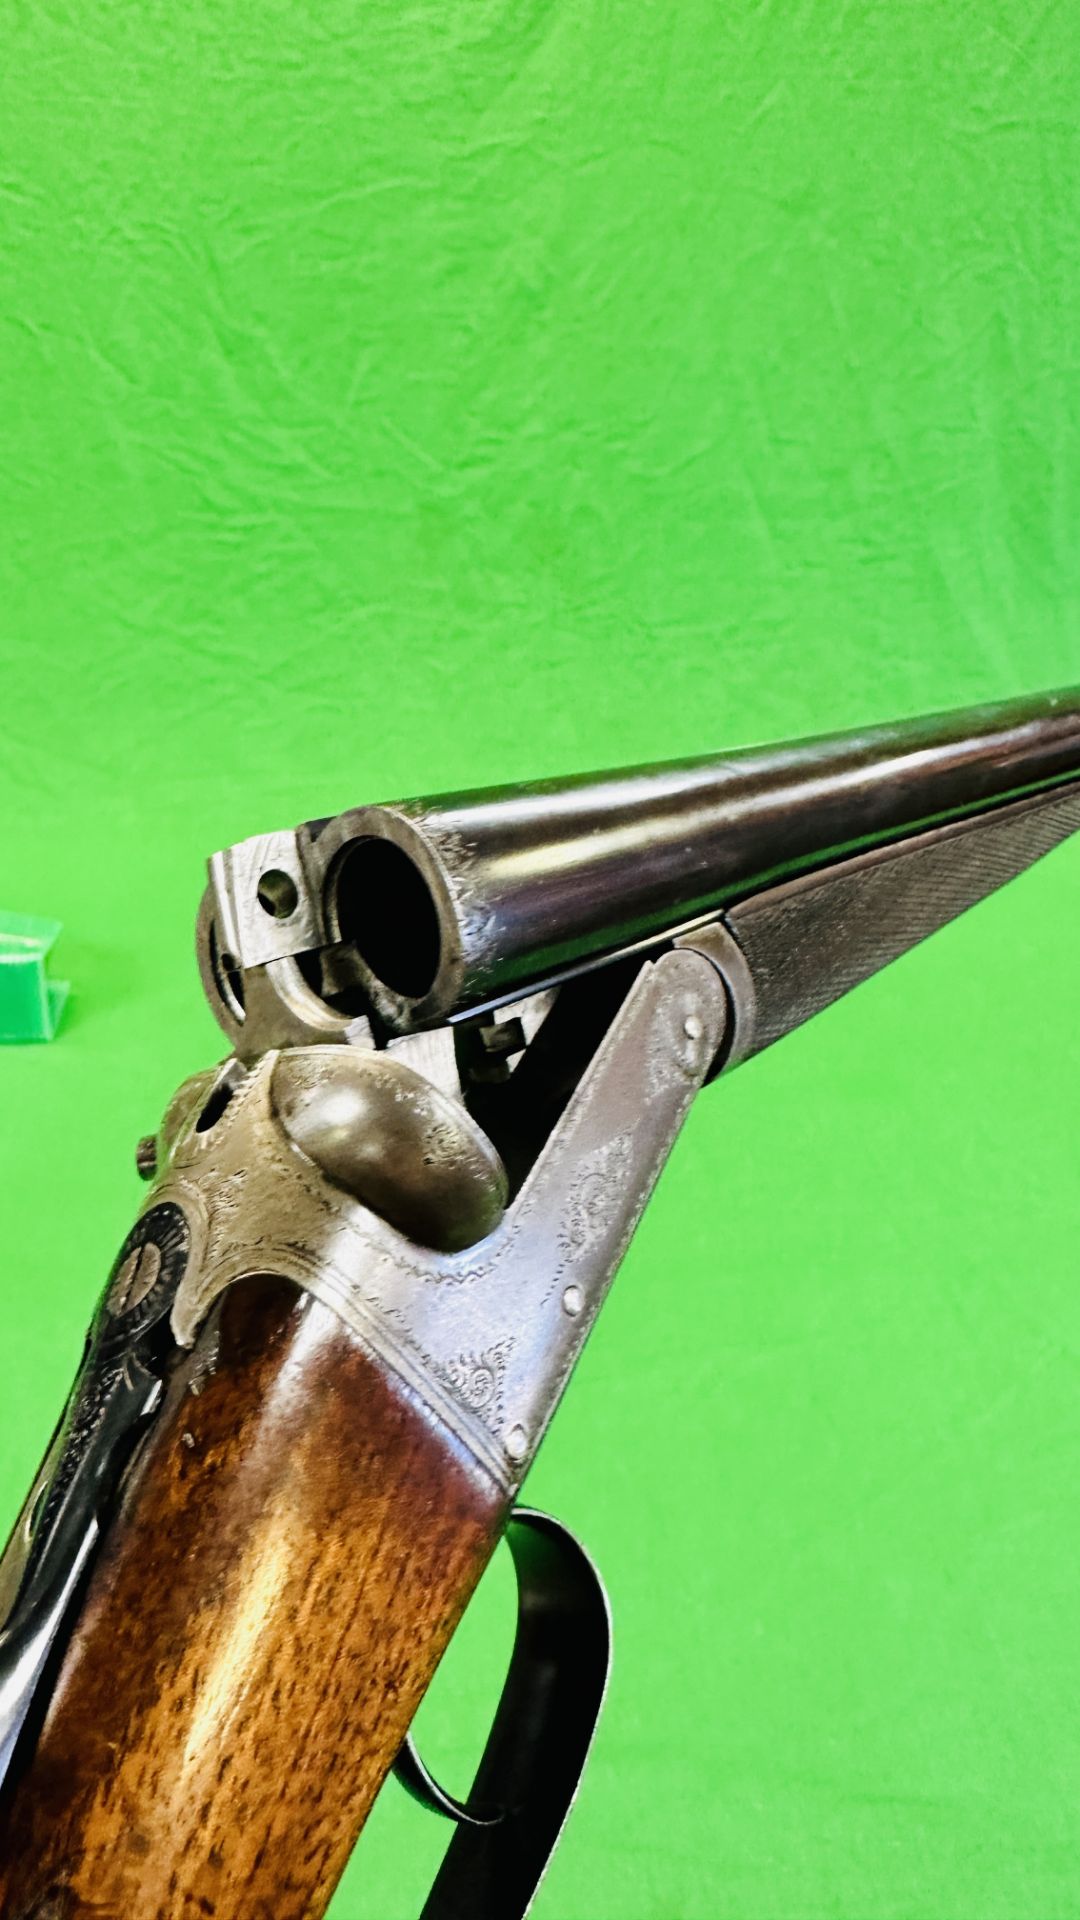 CHUBB 12 BORE SIDE BY SIDE SHOTGUN #1233 (BOXLOCK CYLINDER MECHANISM REPLACED), BSA BARRELS, - Image 13 of 16